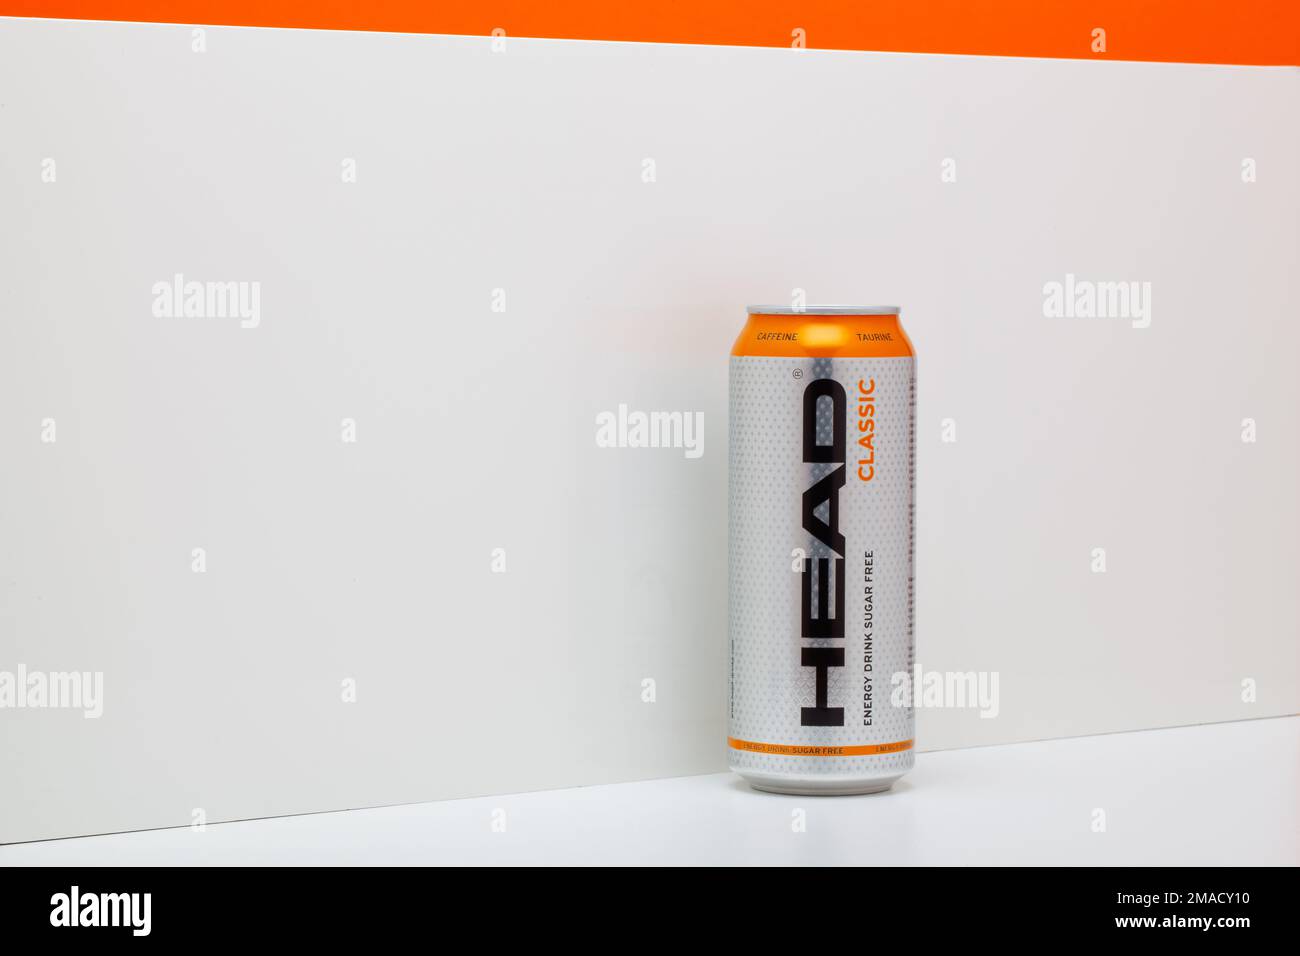 Prague, Czech Republic - 23, March 2022: HEAD CLASSIC Energy Drink the white background. HEAD Energy Drinks contain Caffeine and Taurine which stimula Stock Photo